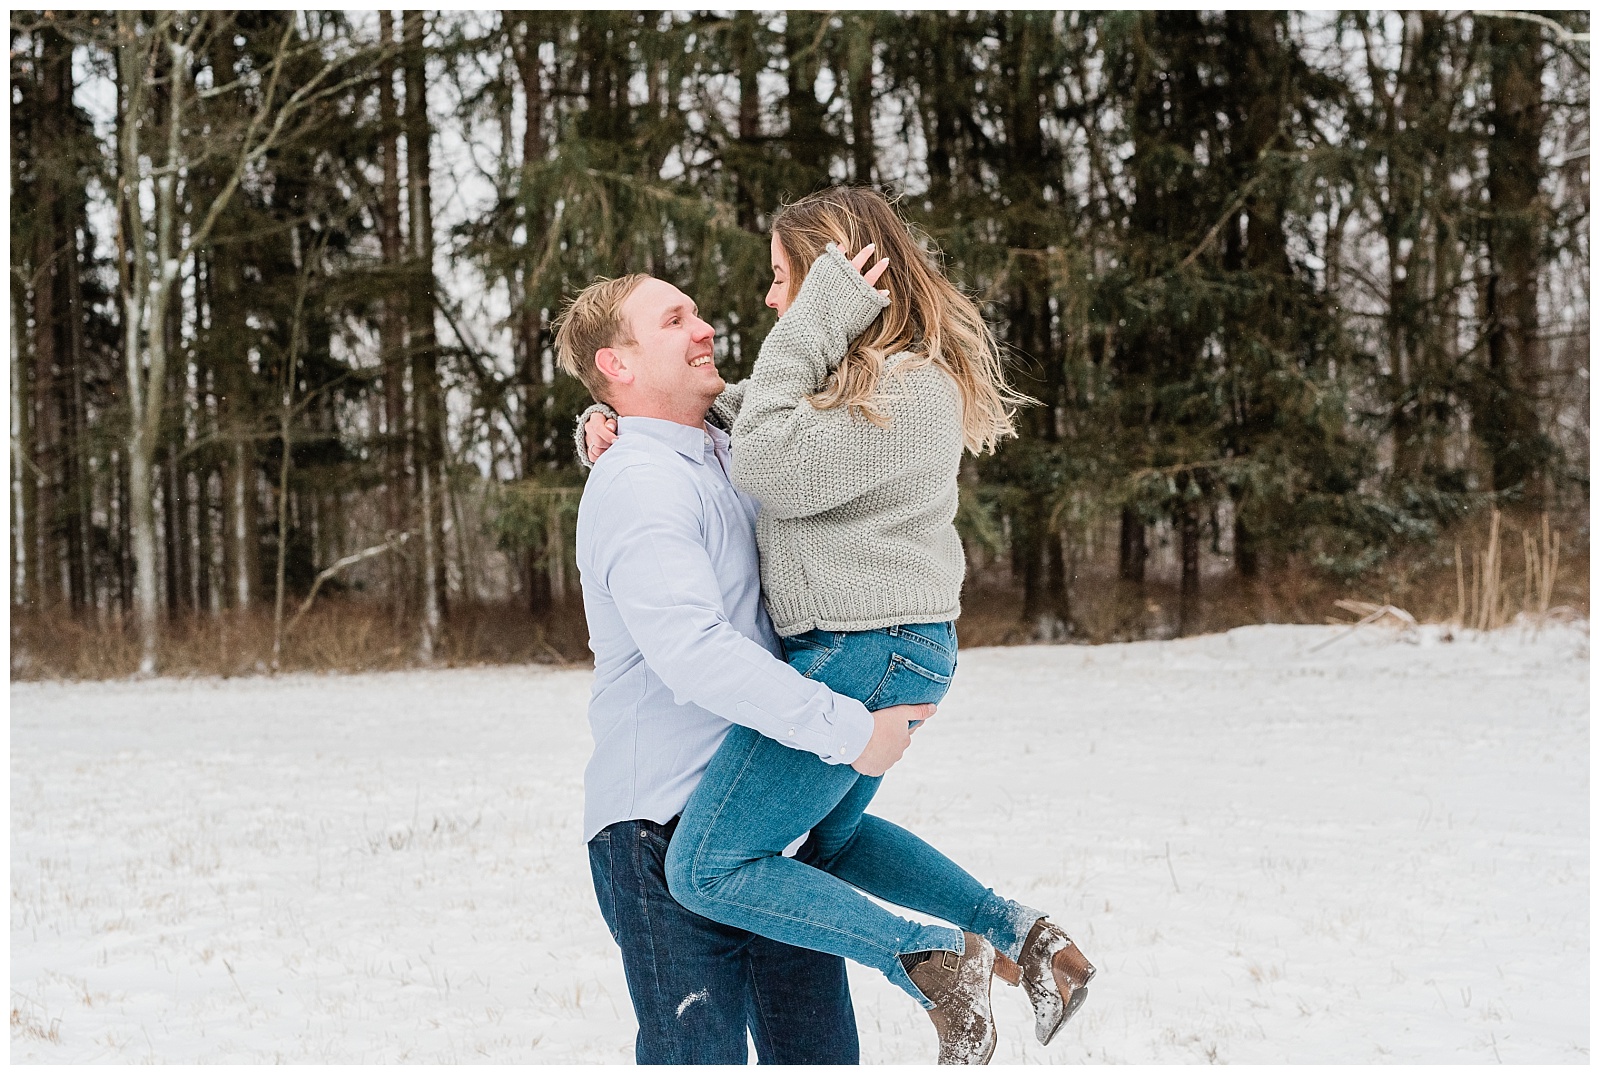 New Jersey Engagement Session, Snowy, Winter, Cozy, Session, Wedding Photographer, Cross Estate Gardens, Snow, Wintry, Lift